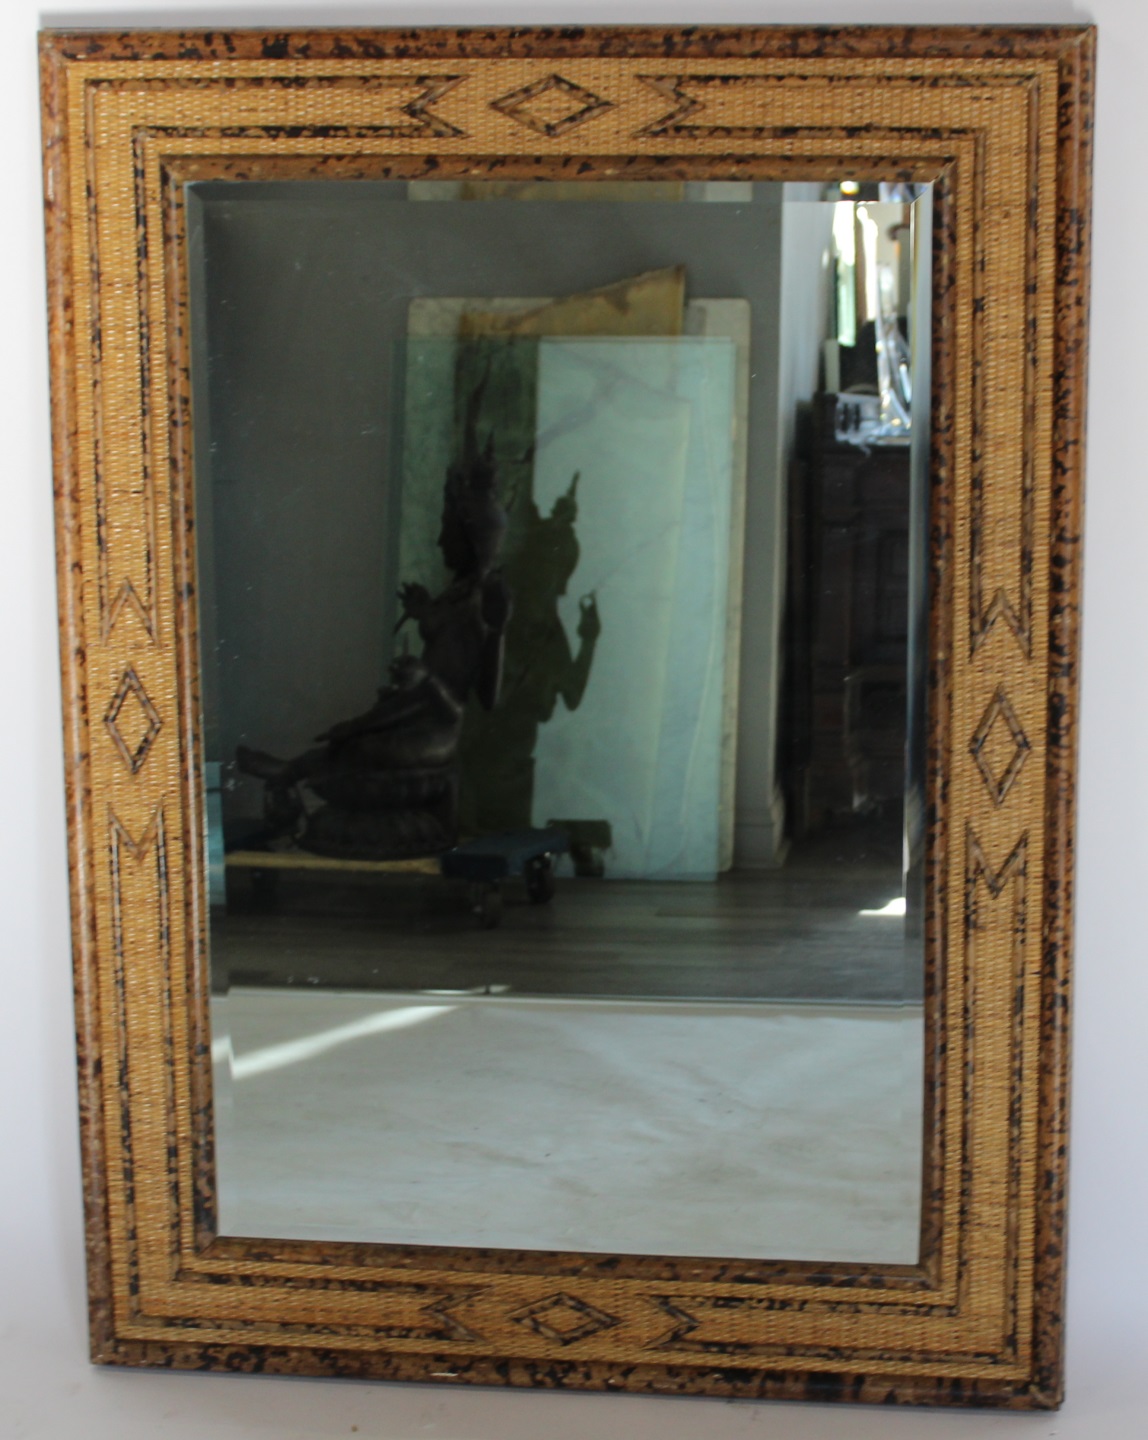 BAMBOO FORM MIRROR. From a Roslyn